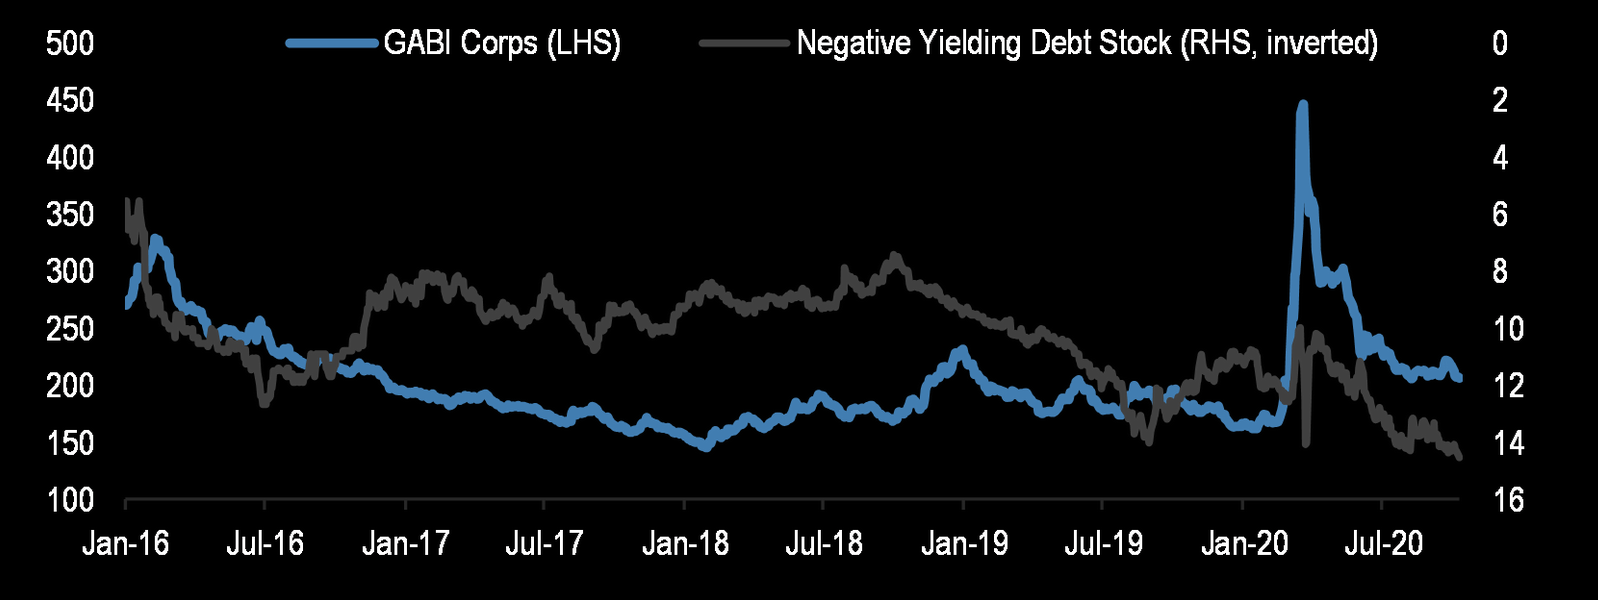 Global Credit Spreads and the Negative-Yielding Government Debt Stock